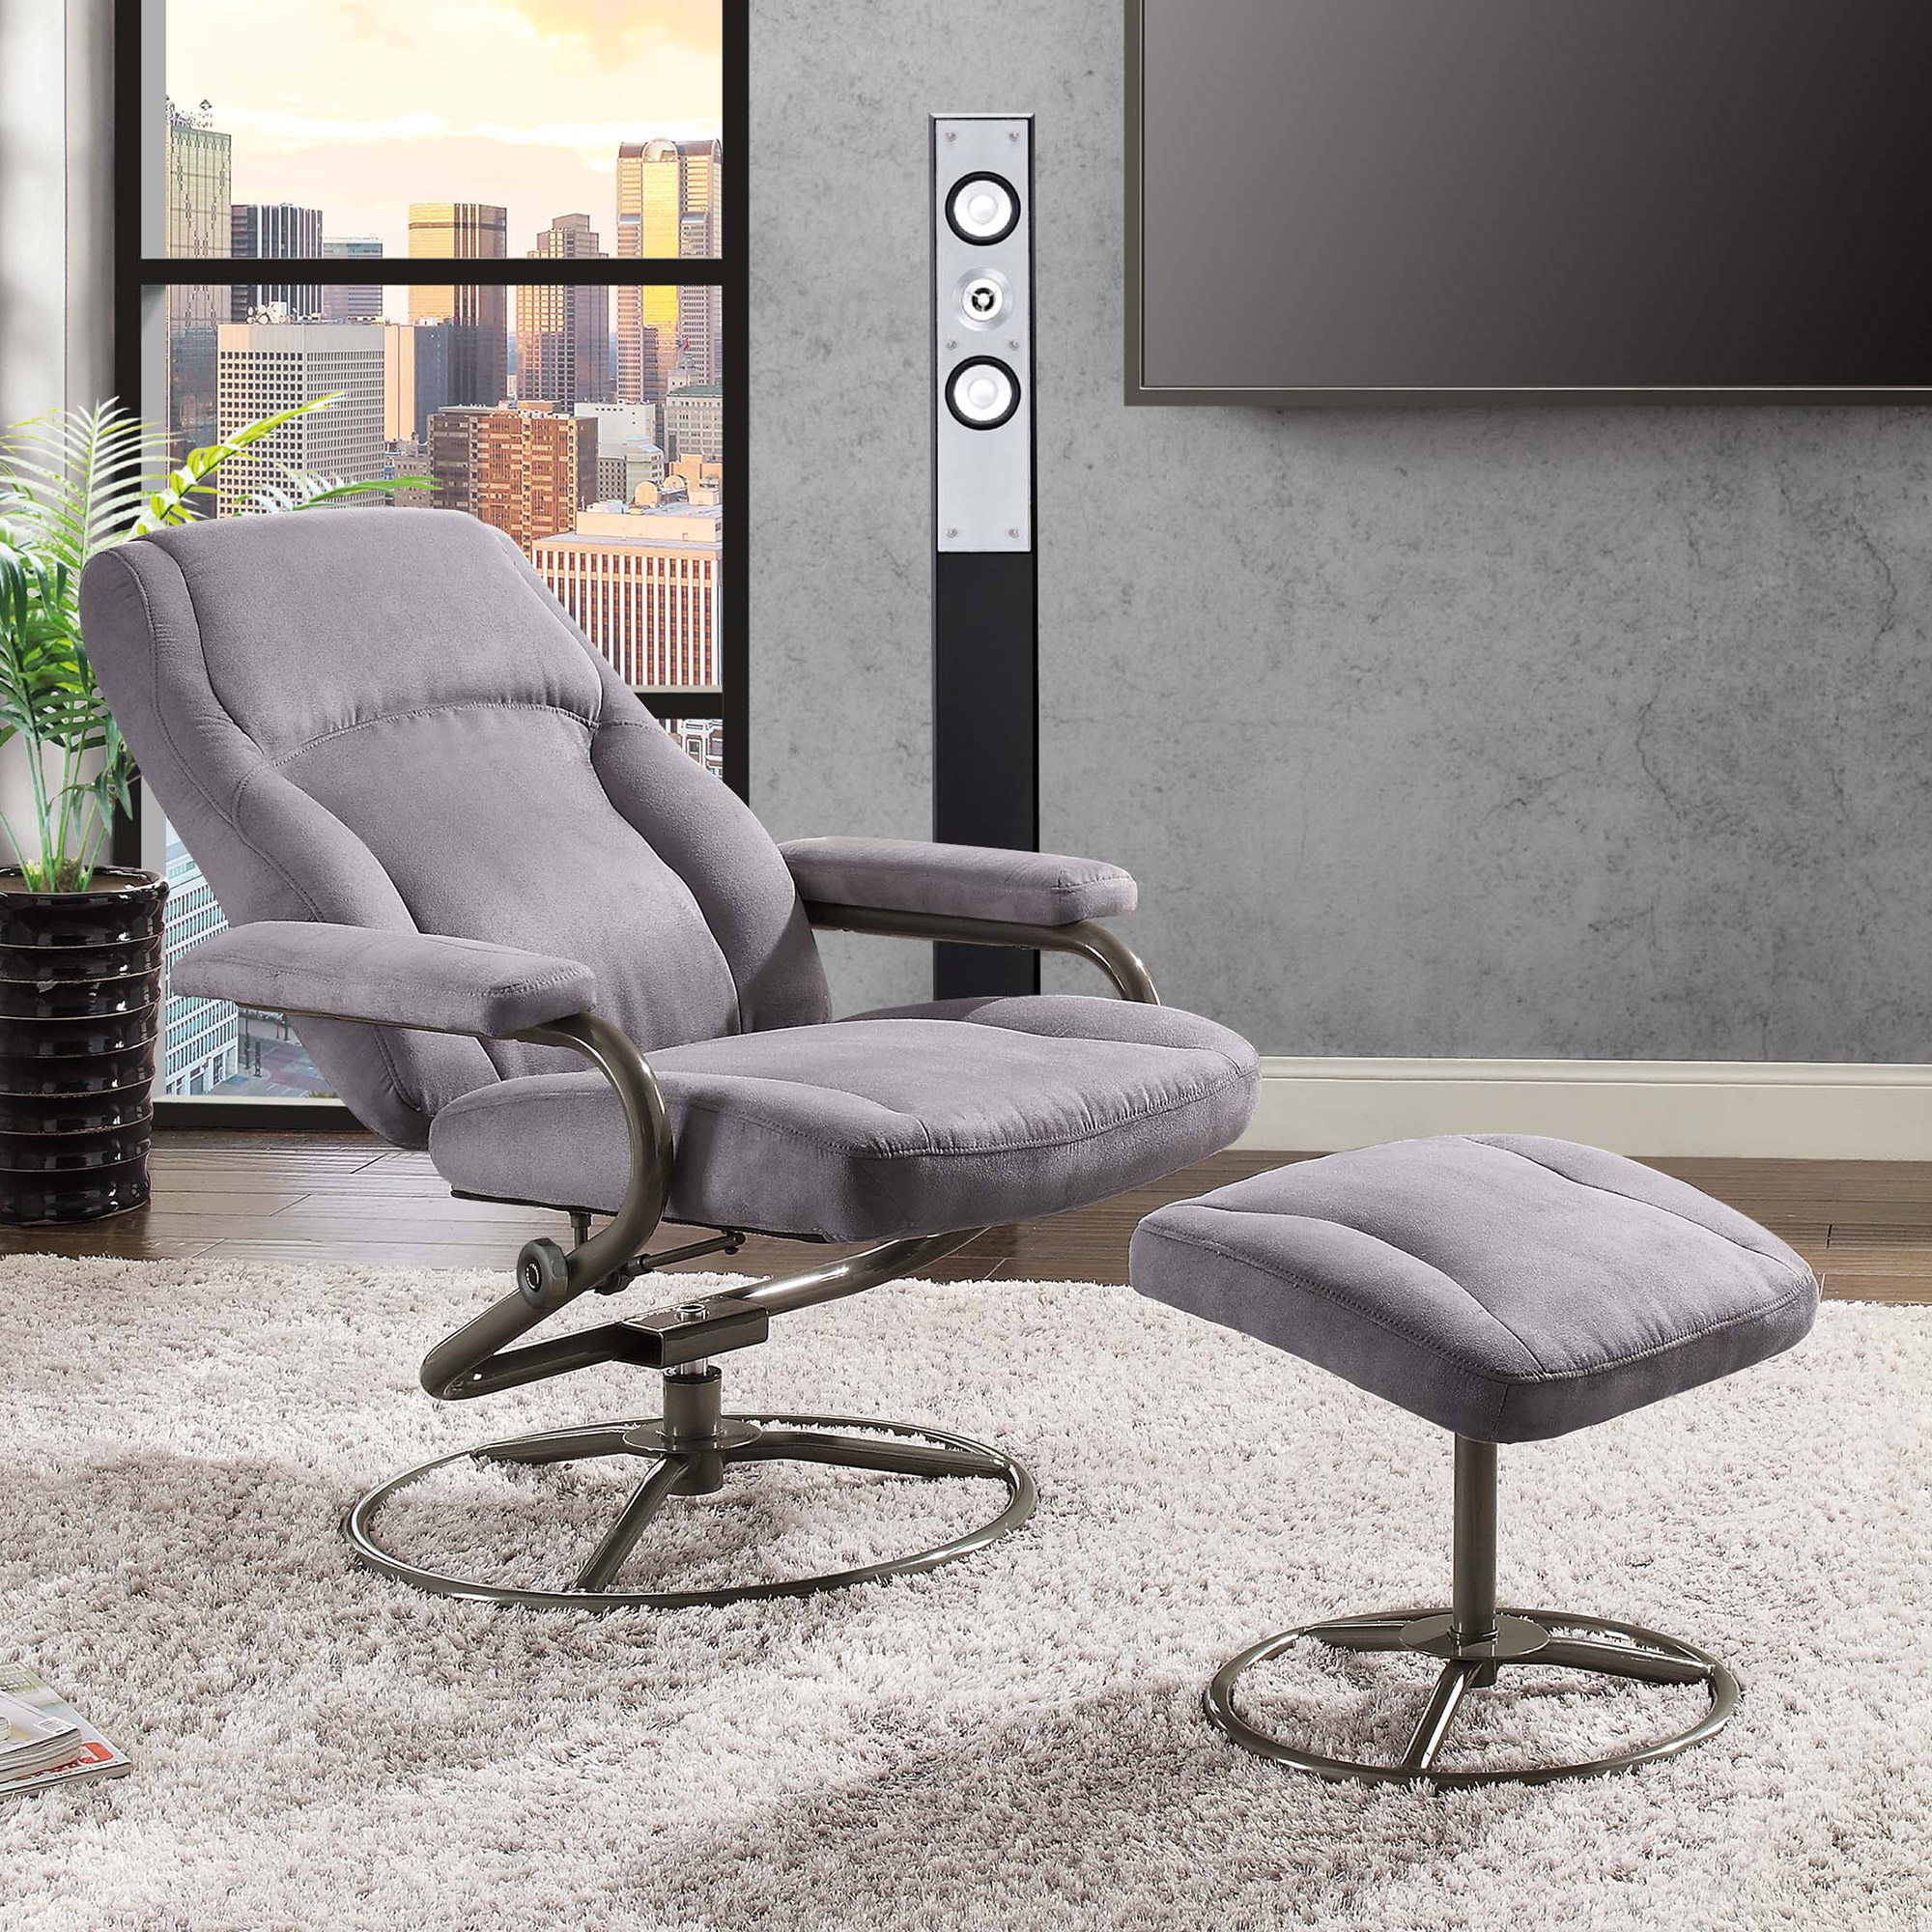 Mainstays Plush Pillowed Recliner Swivel Chair and Ottoman Set, in Gray - image 2 of 4